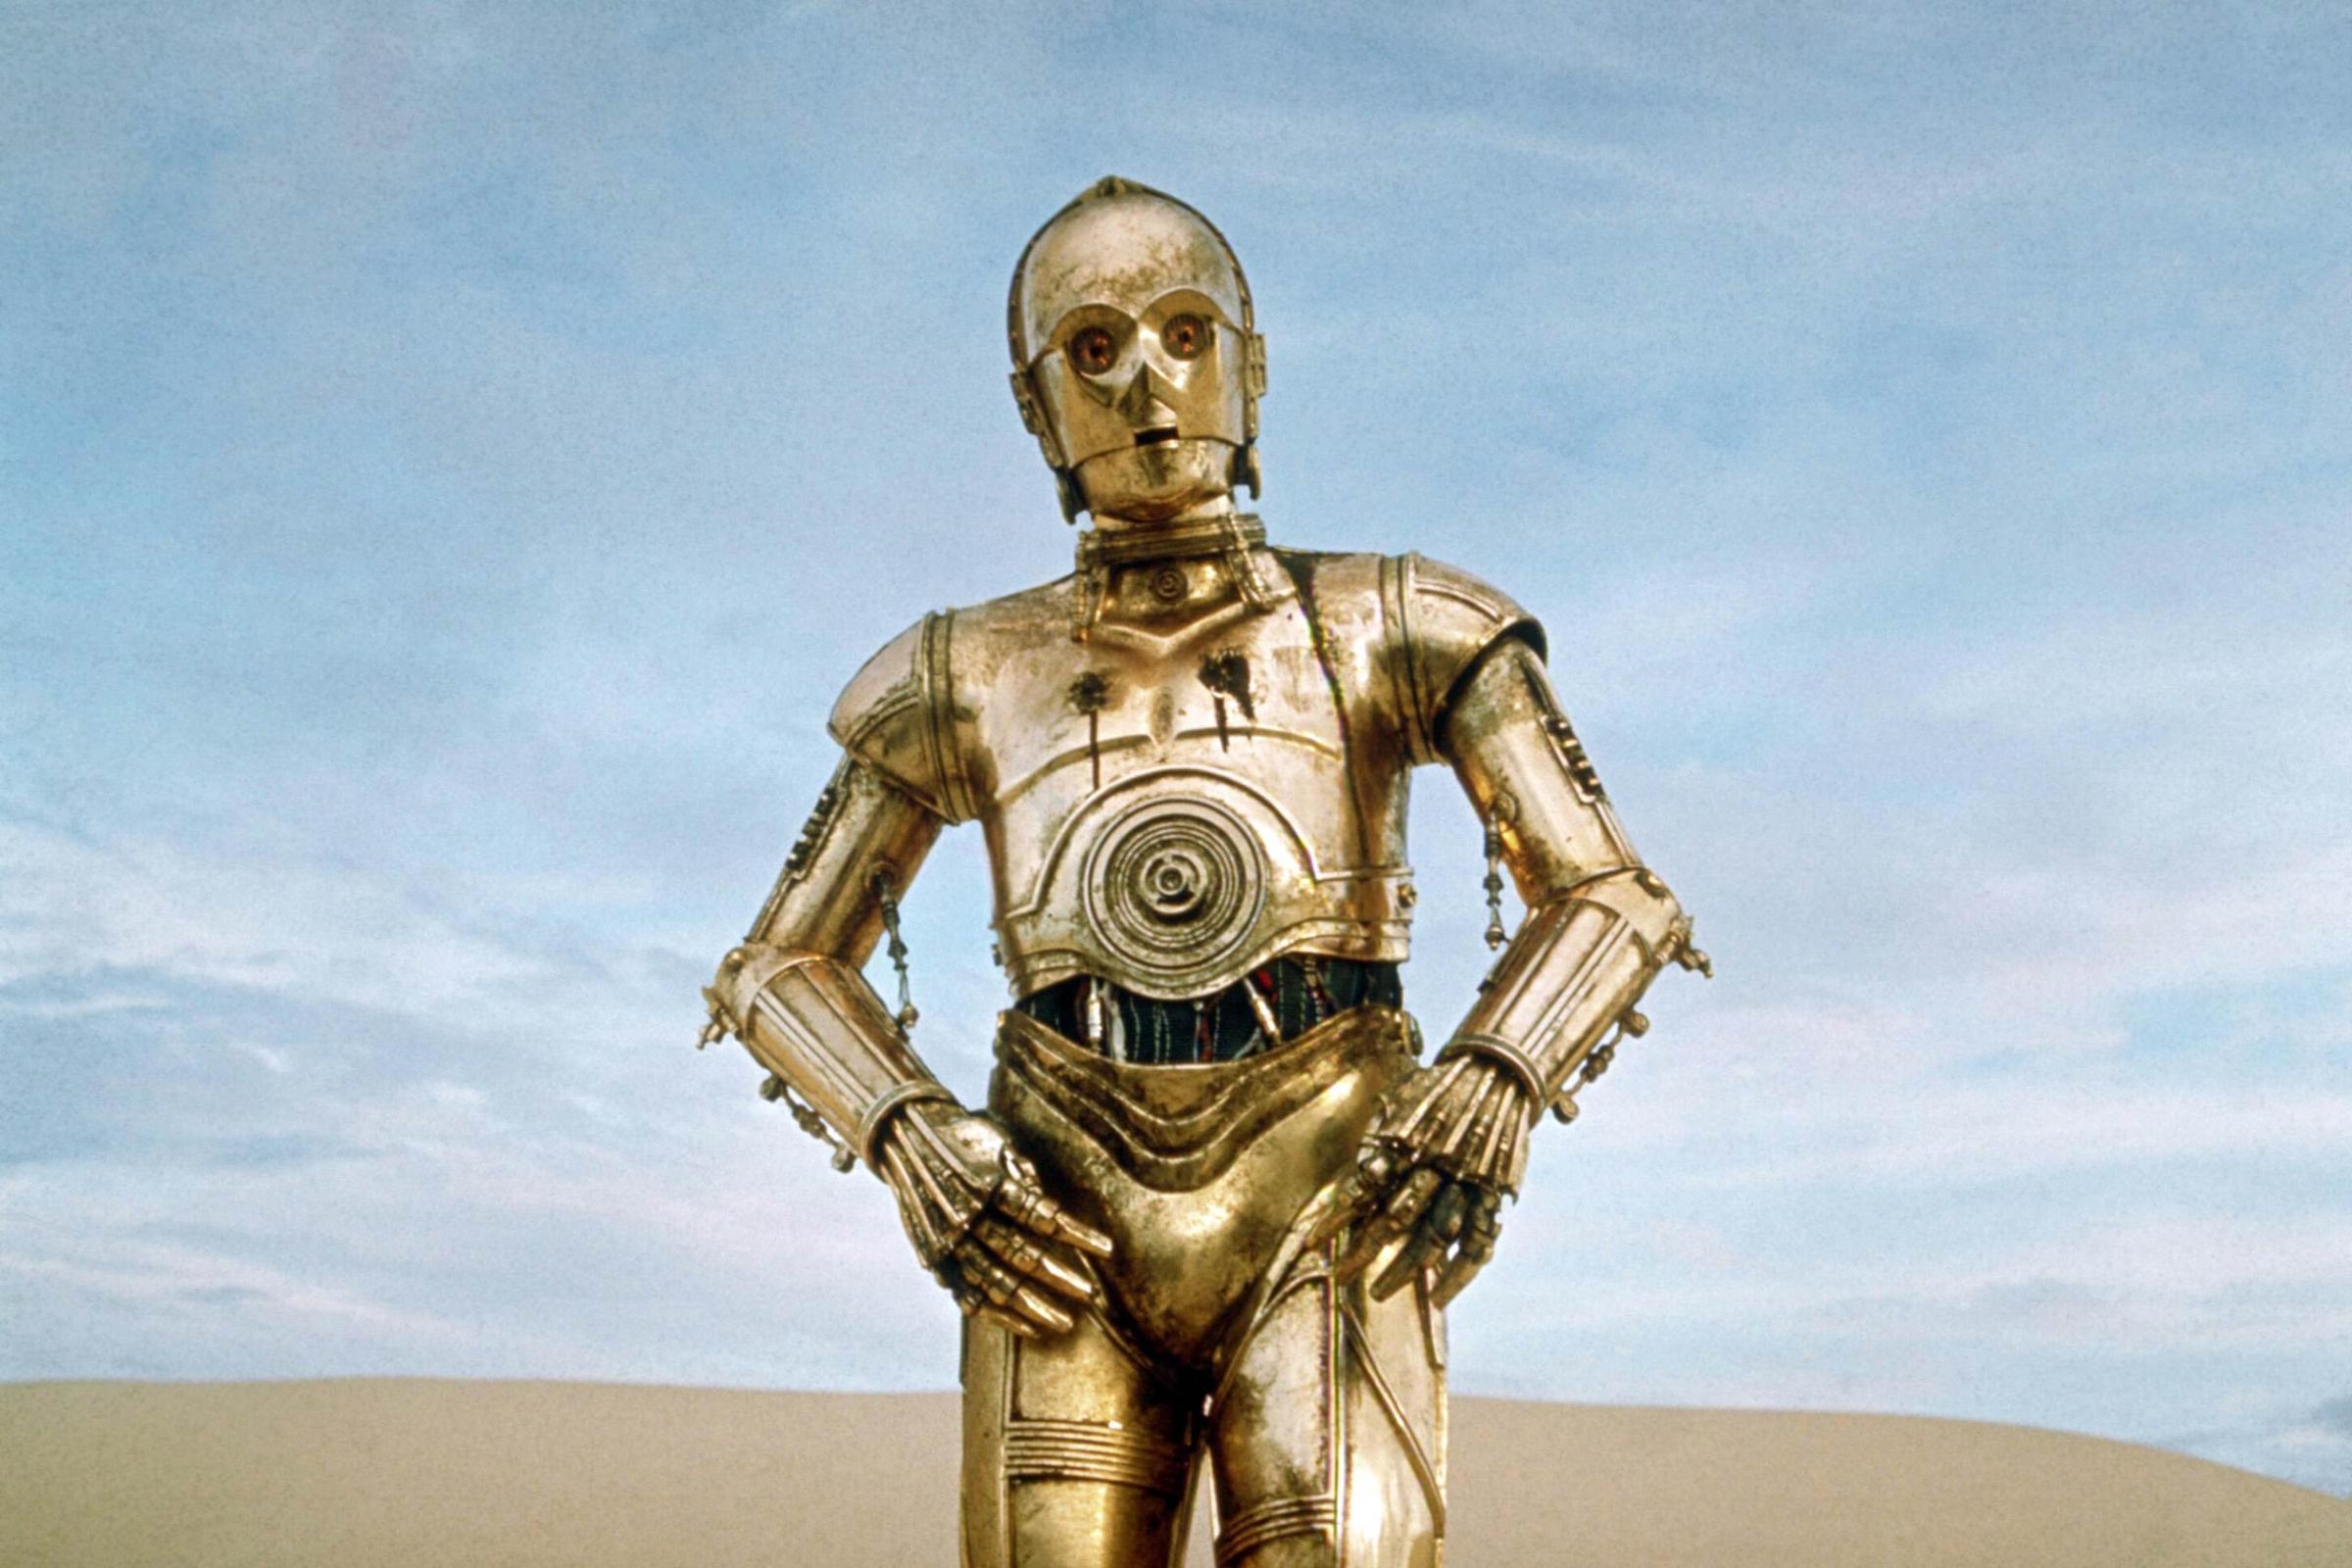 Star Wars (1977)Directed by George LucasShown: Anthony Daniels (as C-3PO)